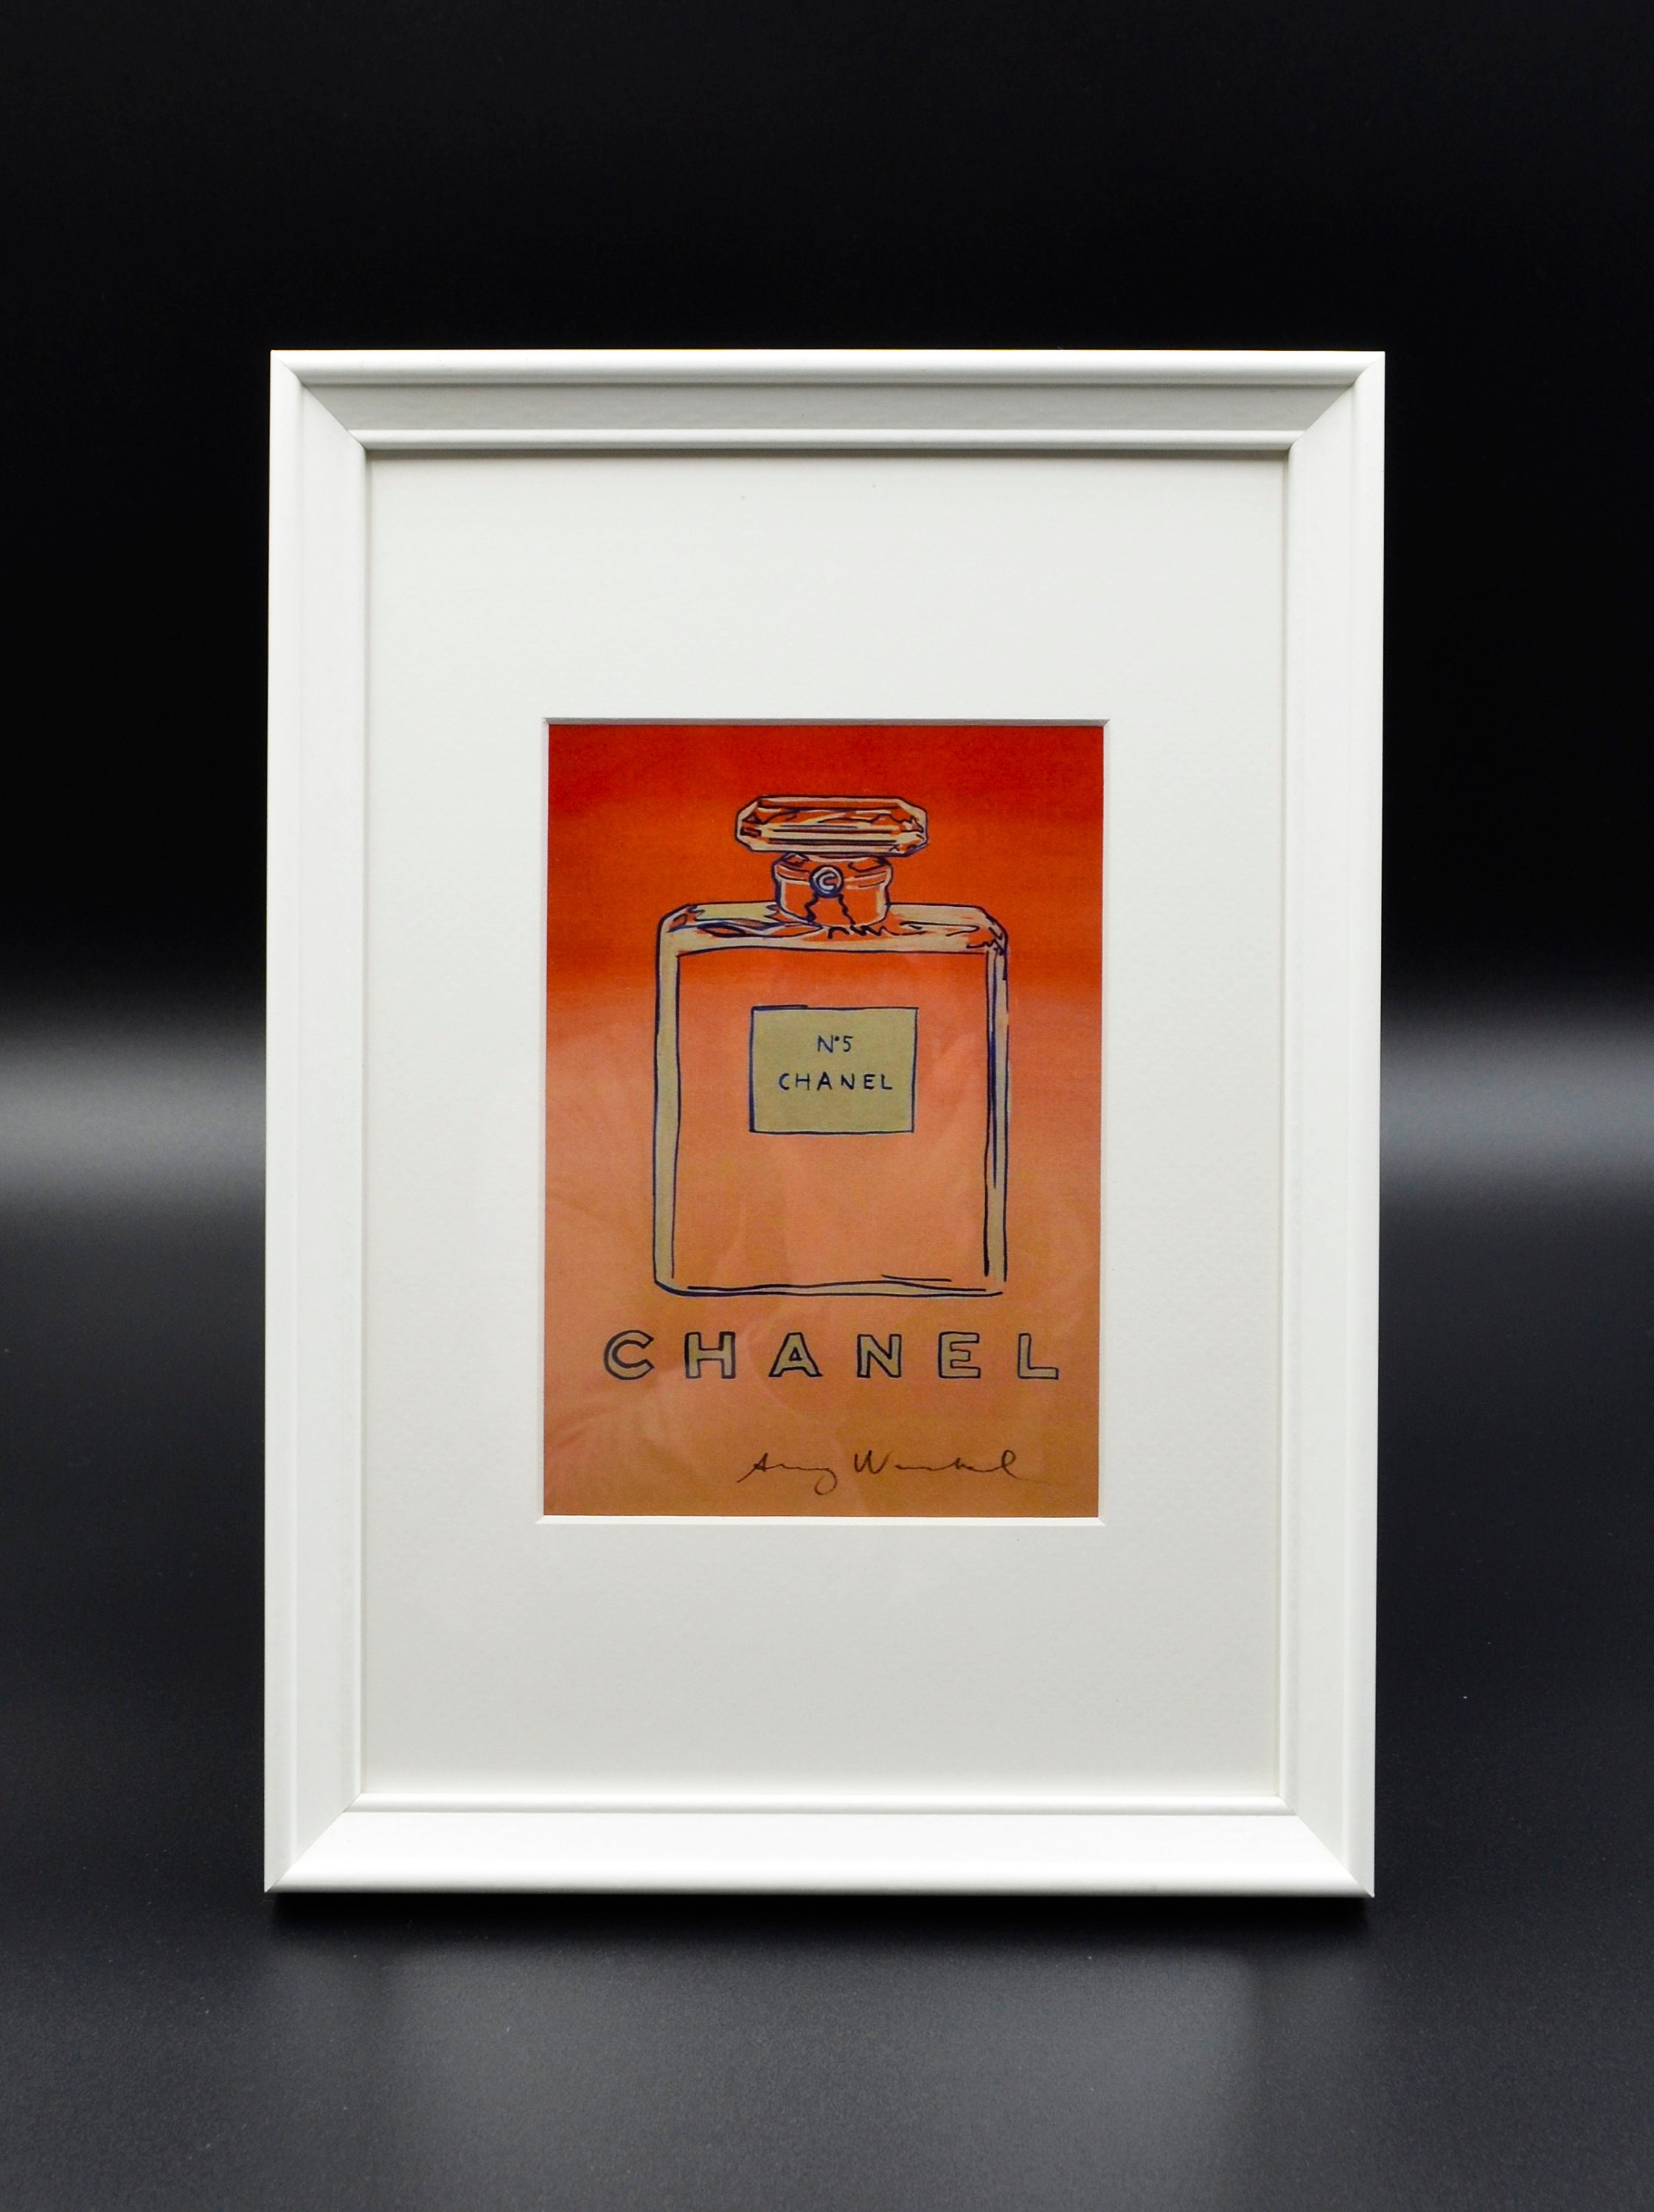 Chanel Toilet Paper - Limited Edition of 1 Artwork